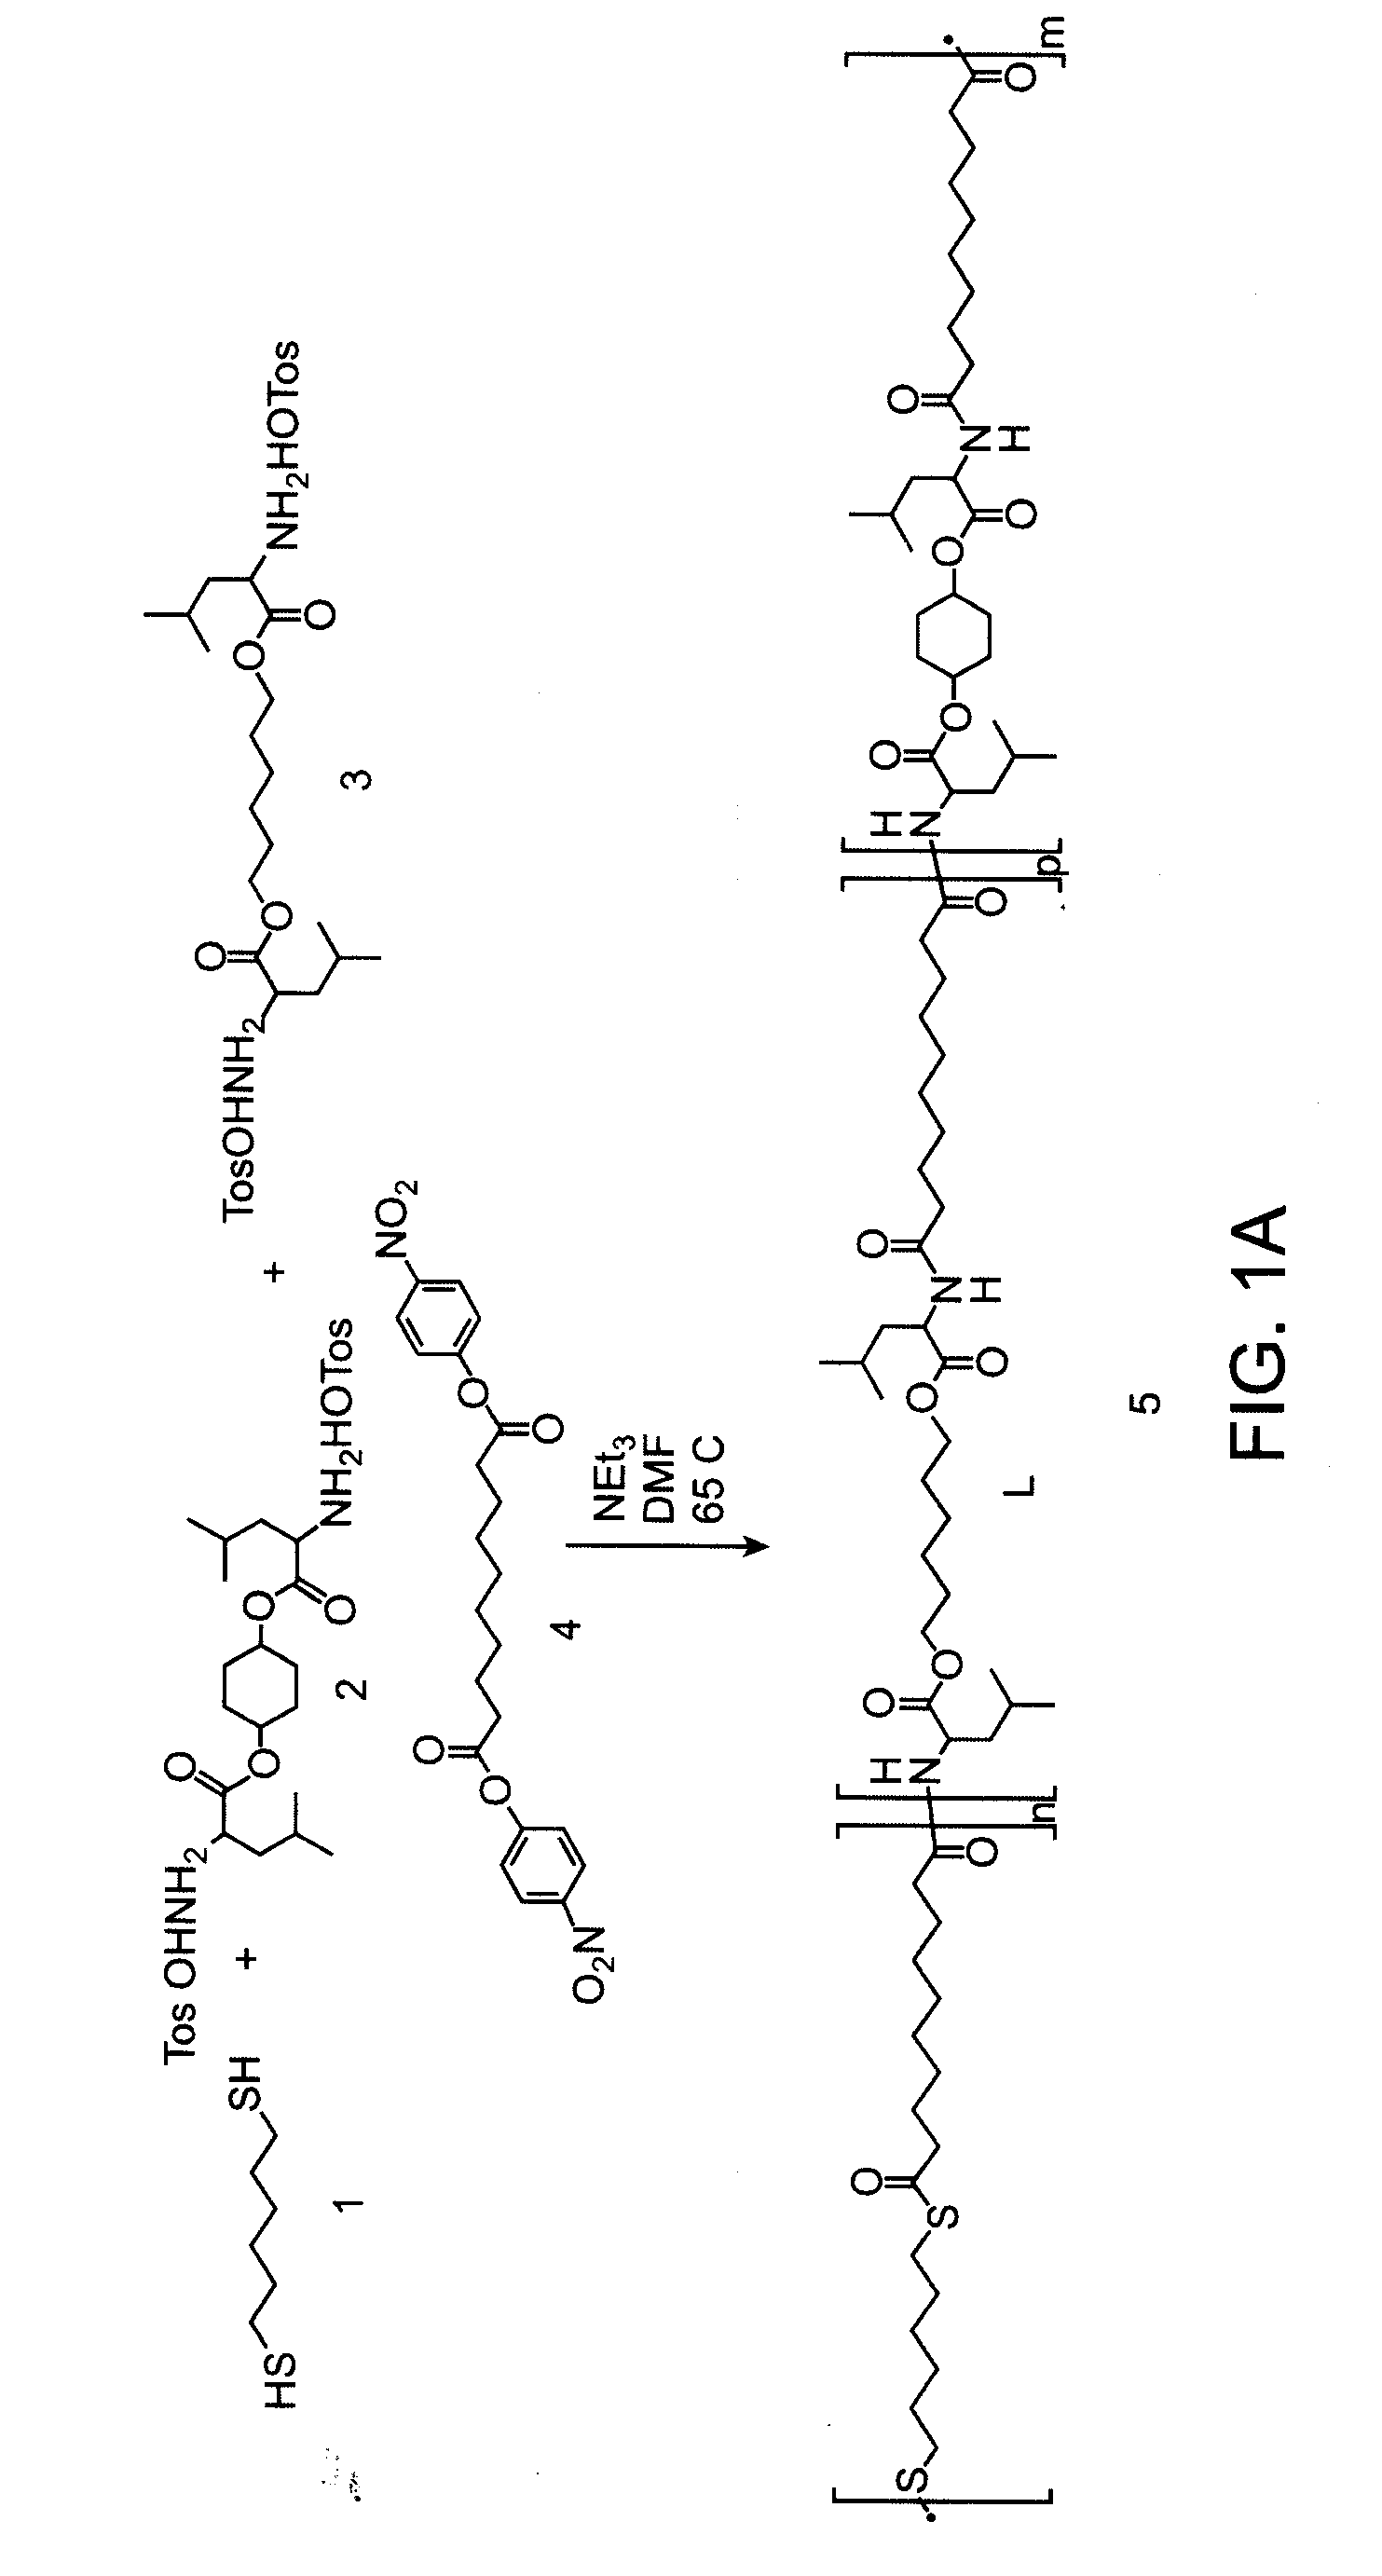 Thioester-ester-amide copolymers